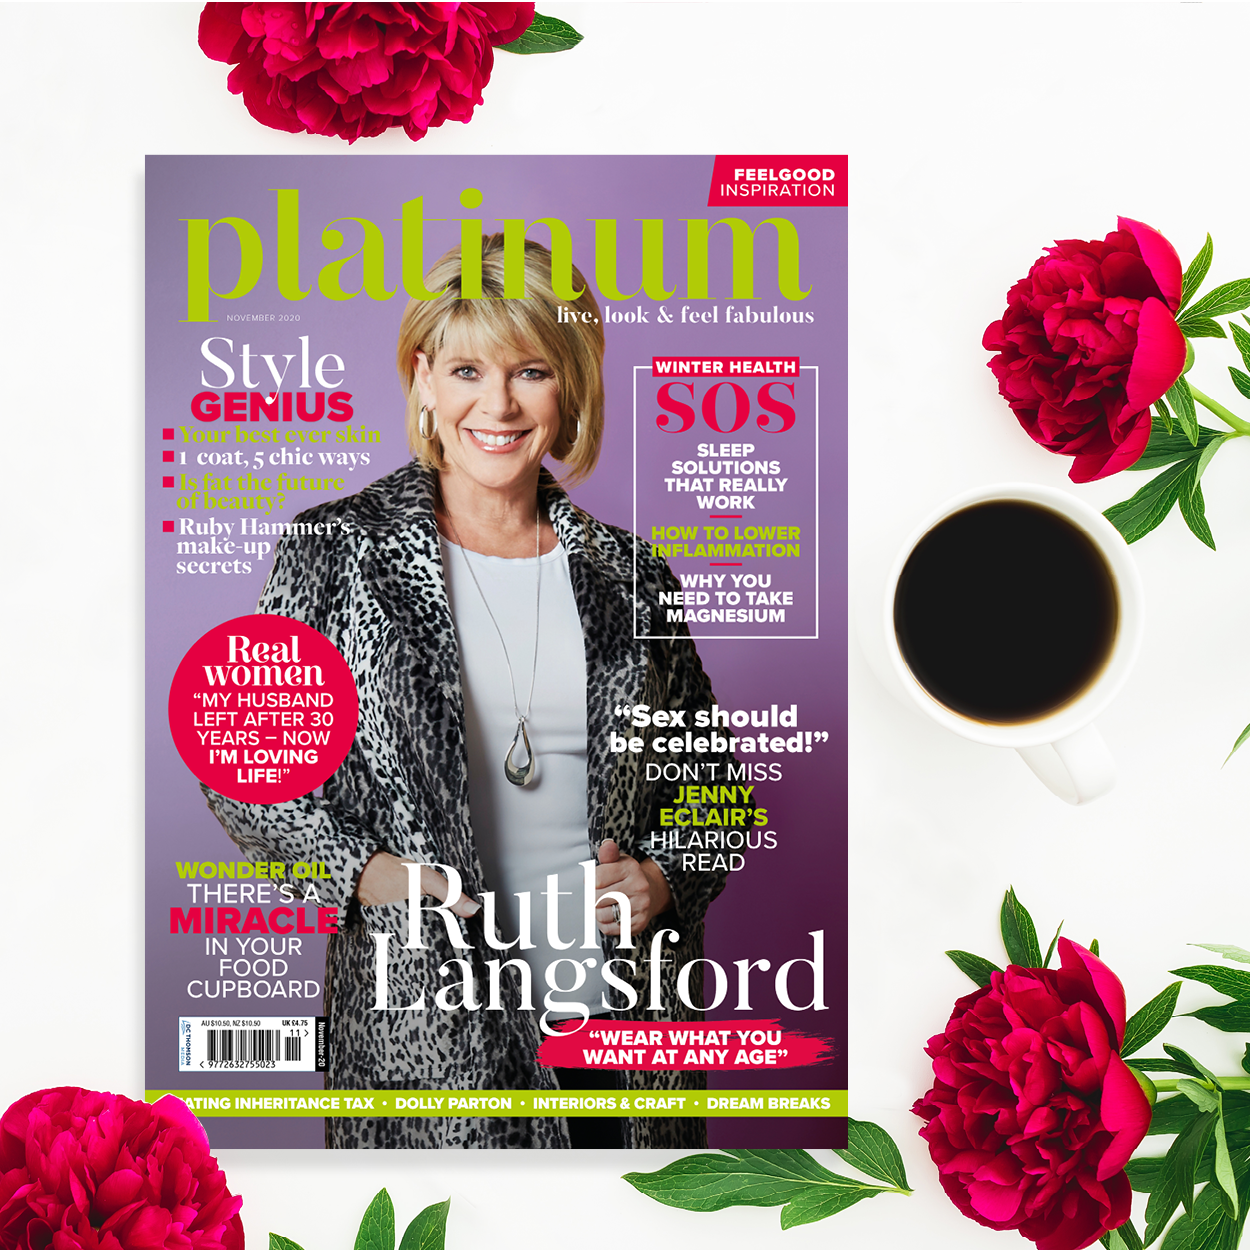 Take a look inside our new issue, featuring Ruth Langsford — on sale now!